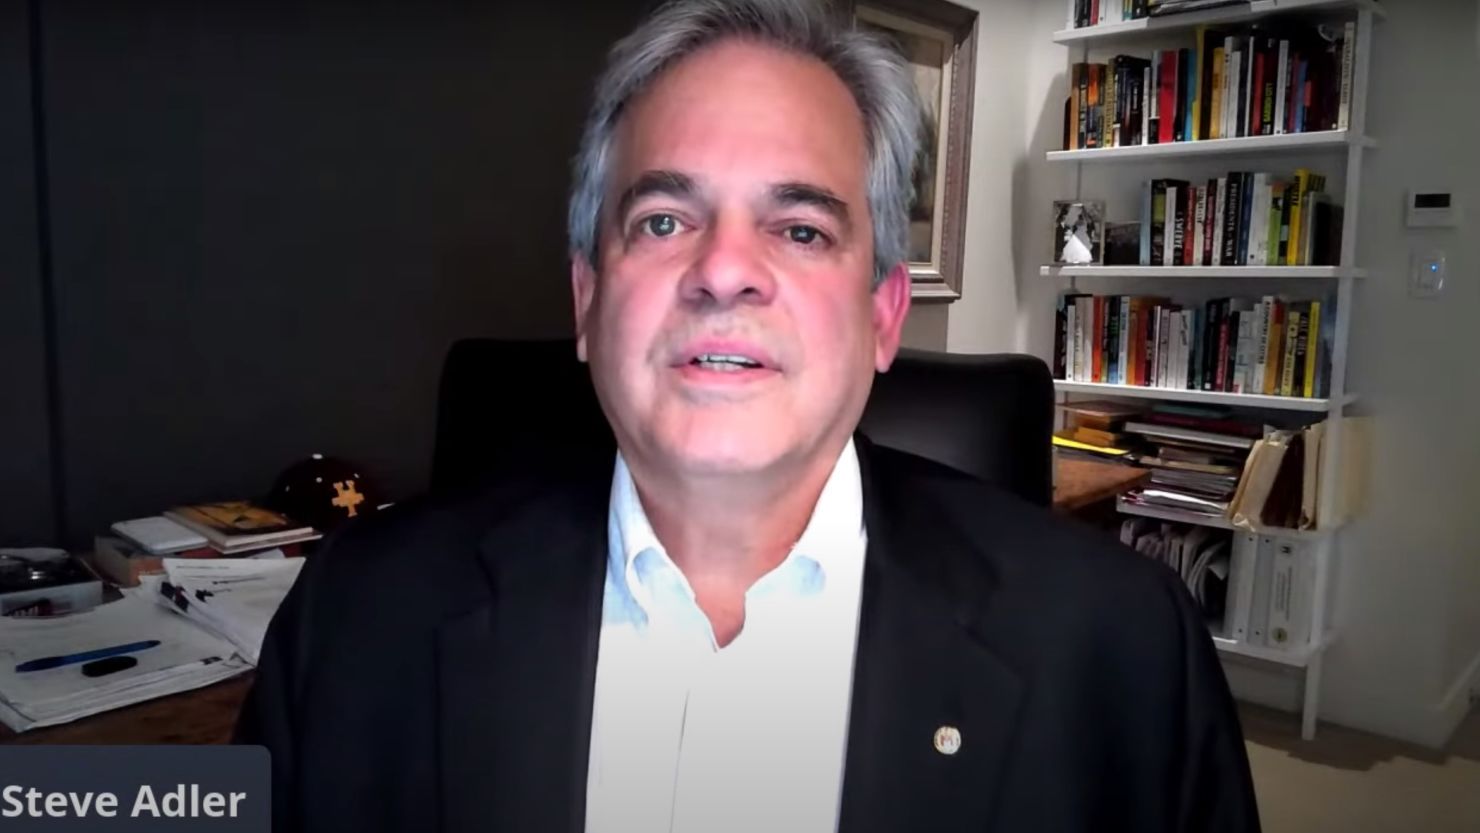 Mayor Steve Adler of Austin, Texas, apologized after advising against travel while he was in Mexico.